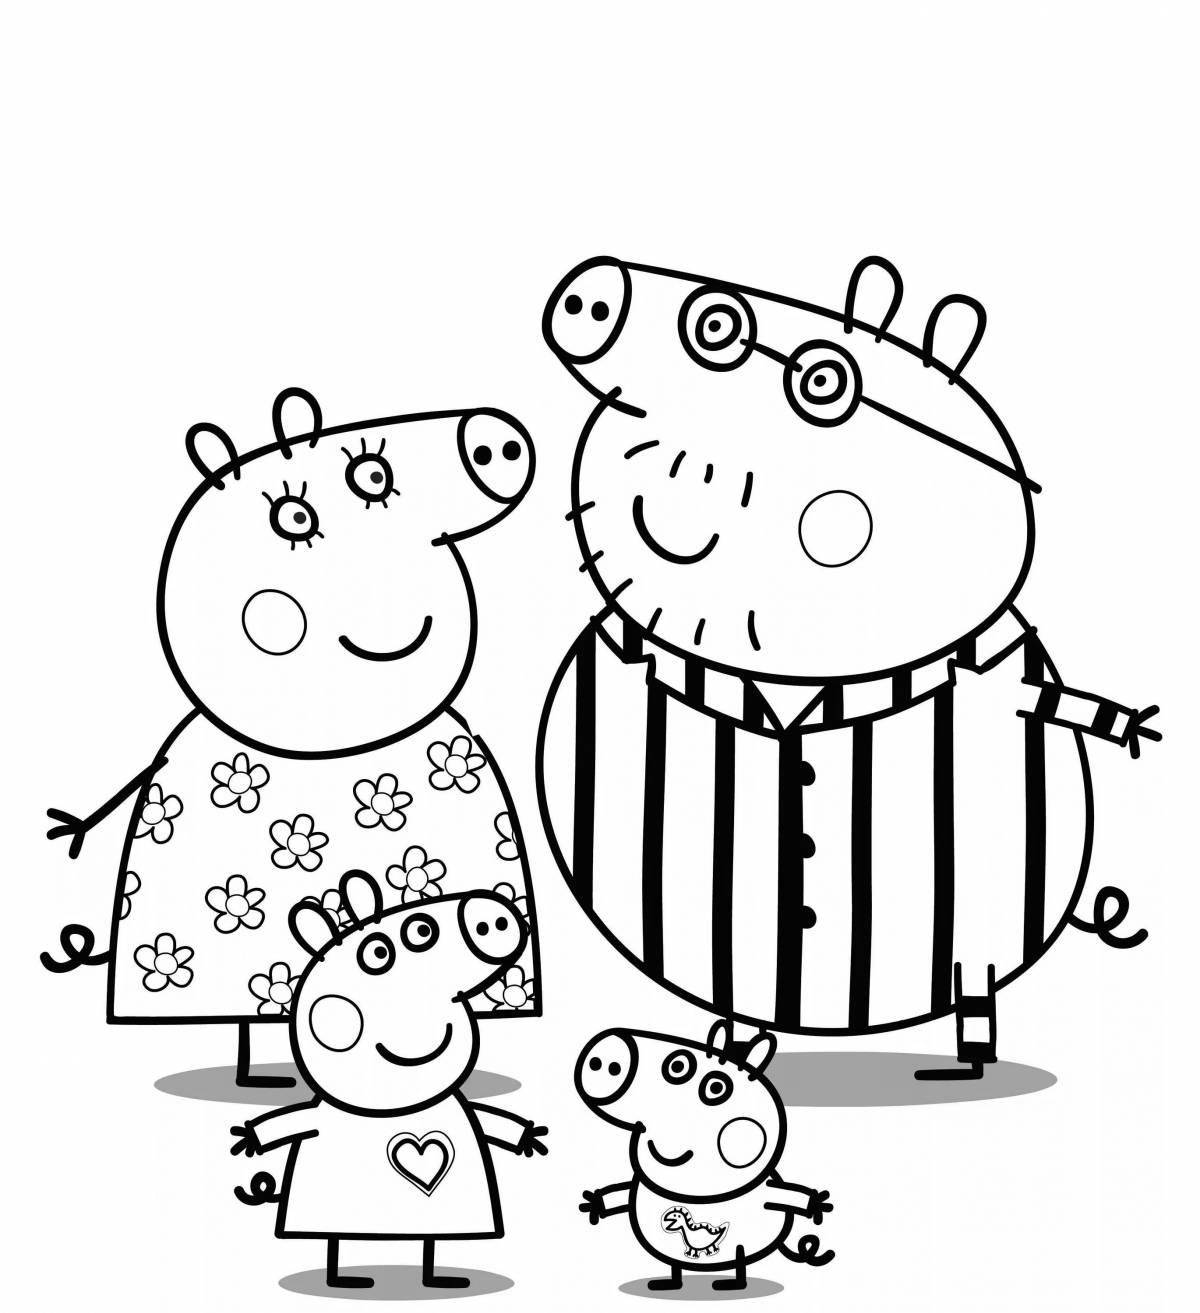 Coloring page happy peppa for kids